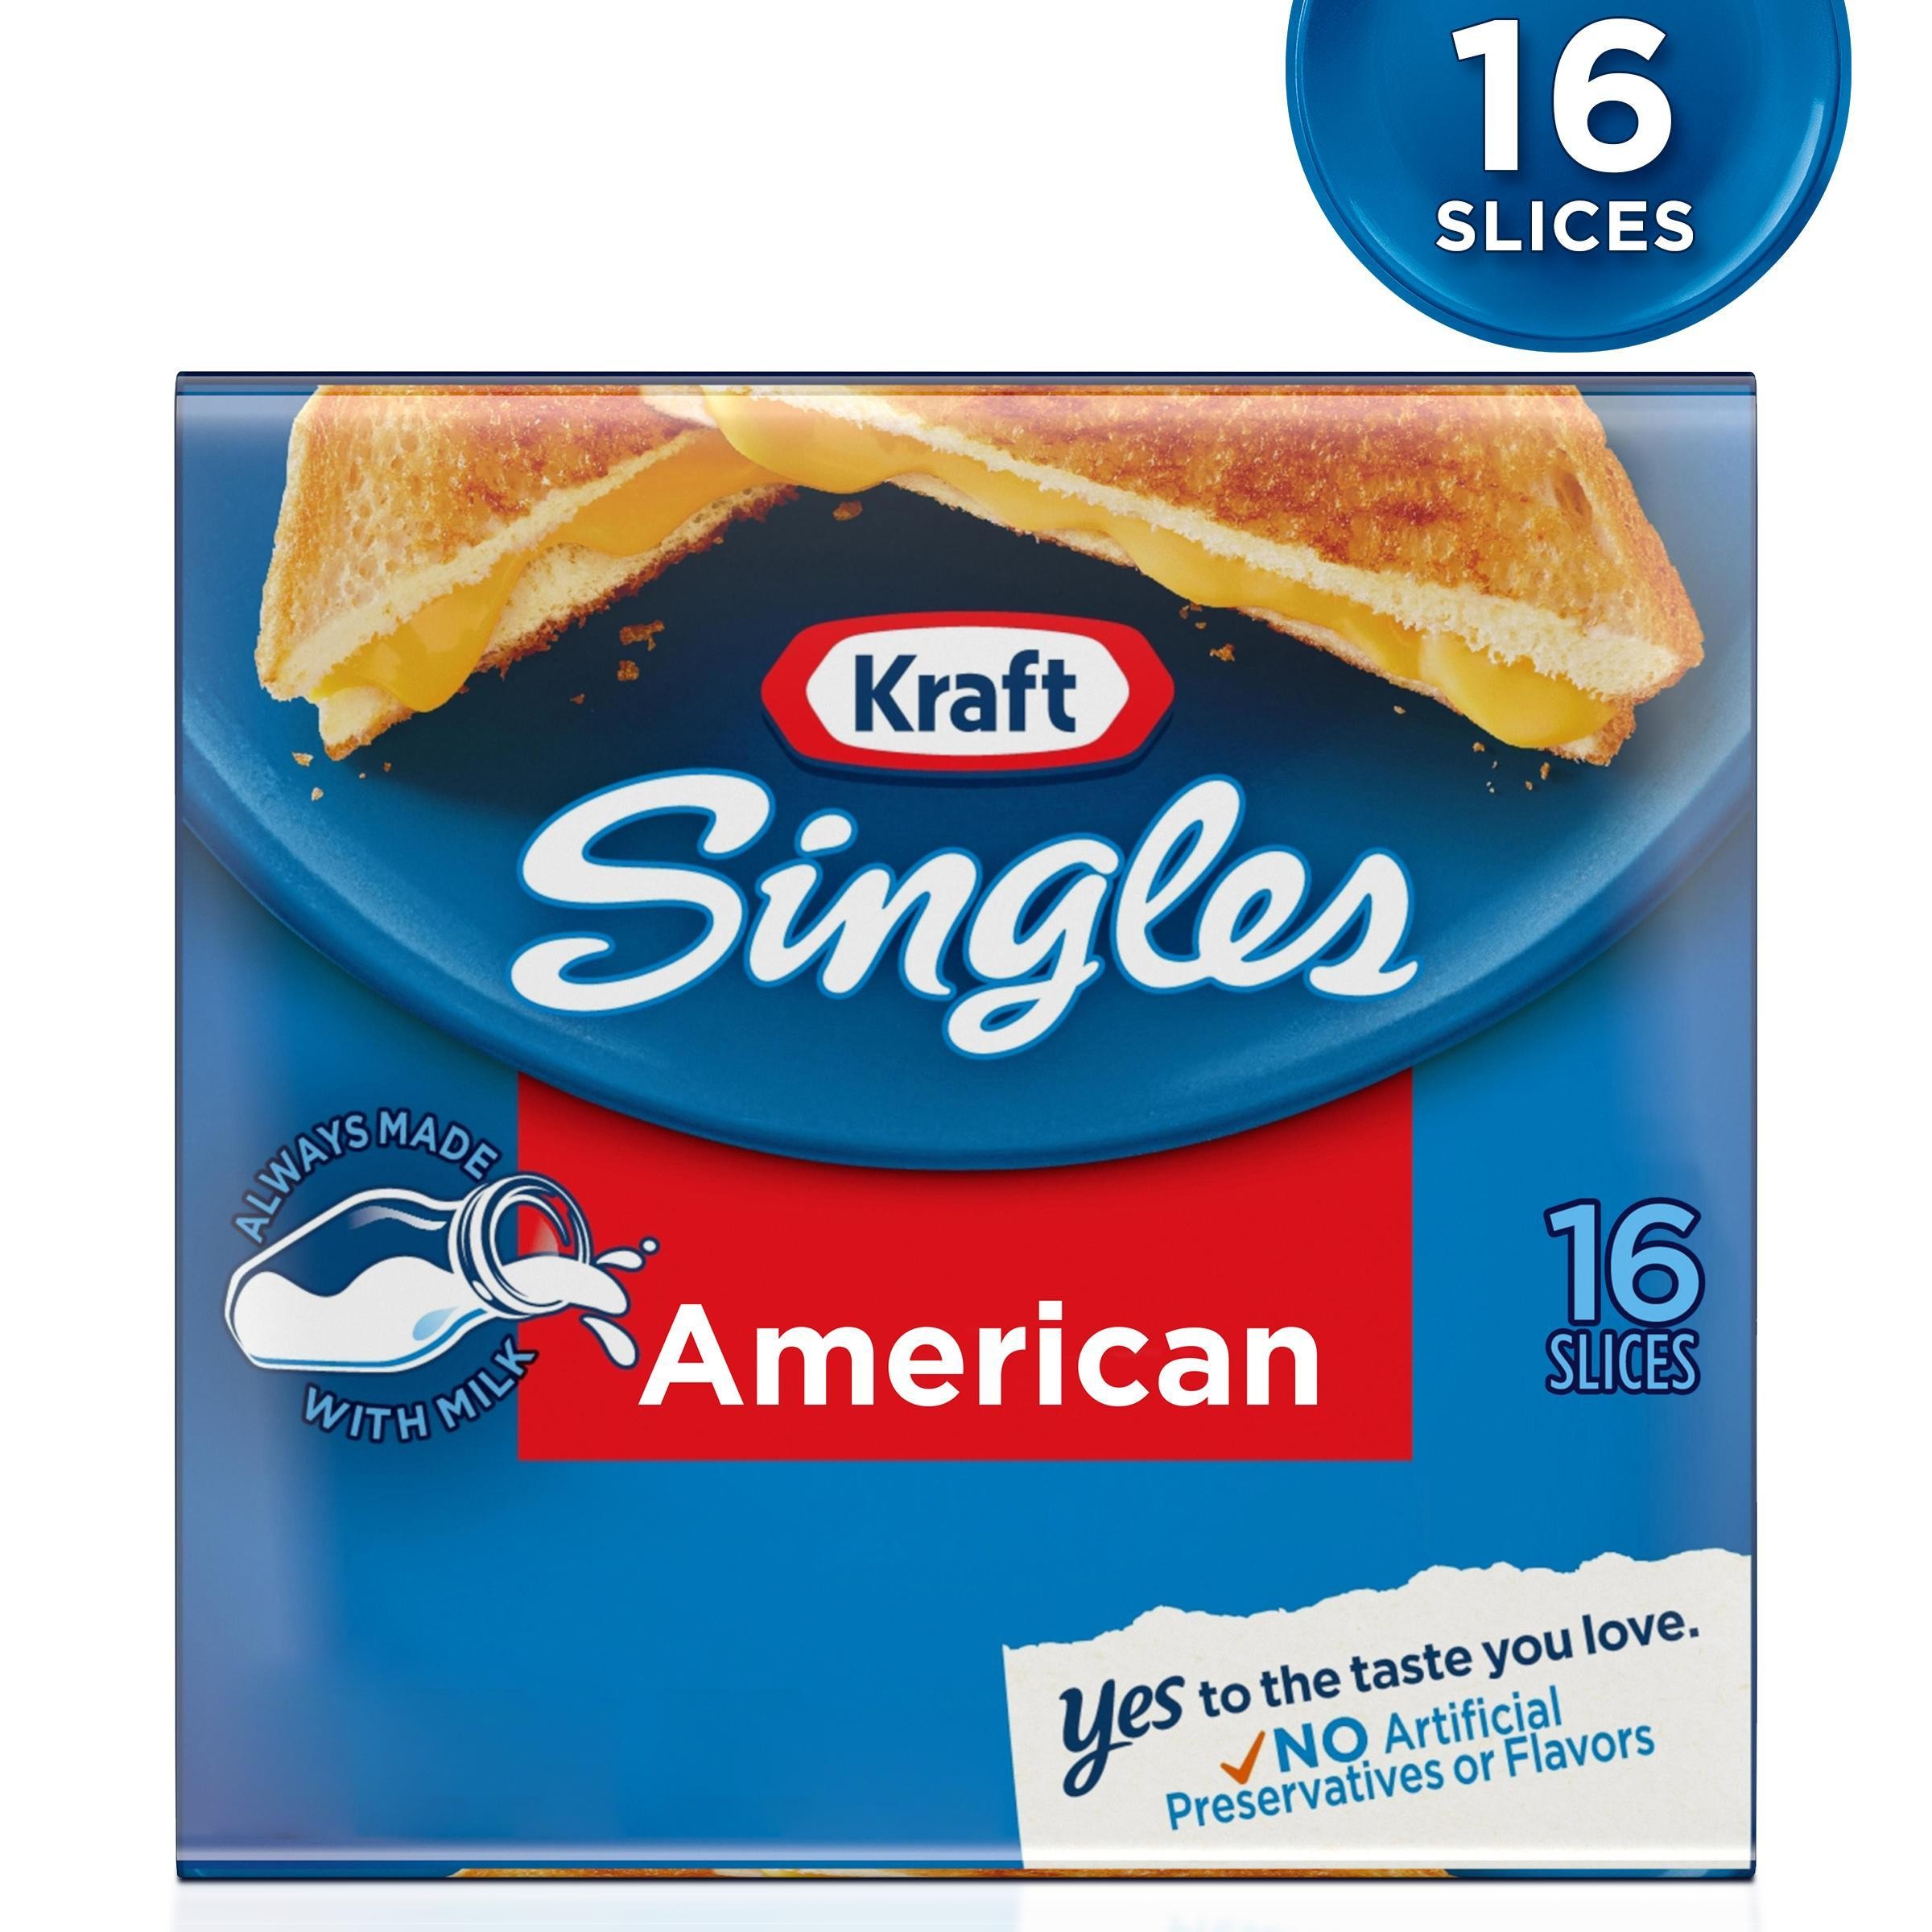 Kraft Singles Pasteurized Prepared Cheese Product - 12.0 Ounces